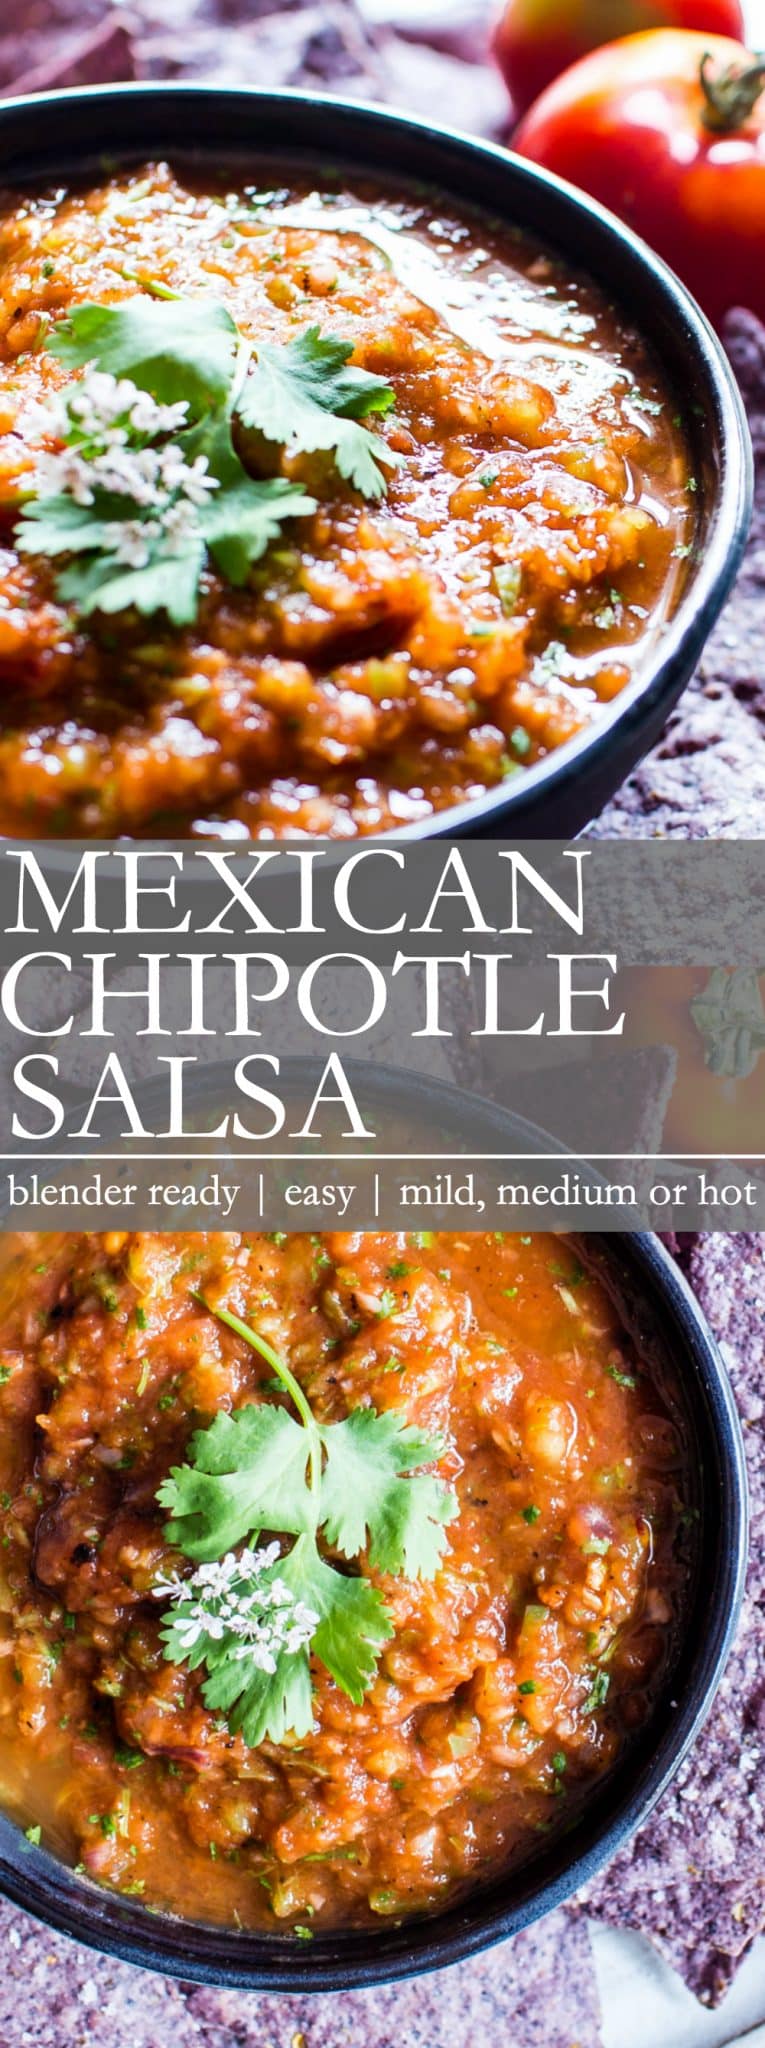 Homemade easy Mexican Chipotle Salsa collage with text overlay